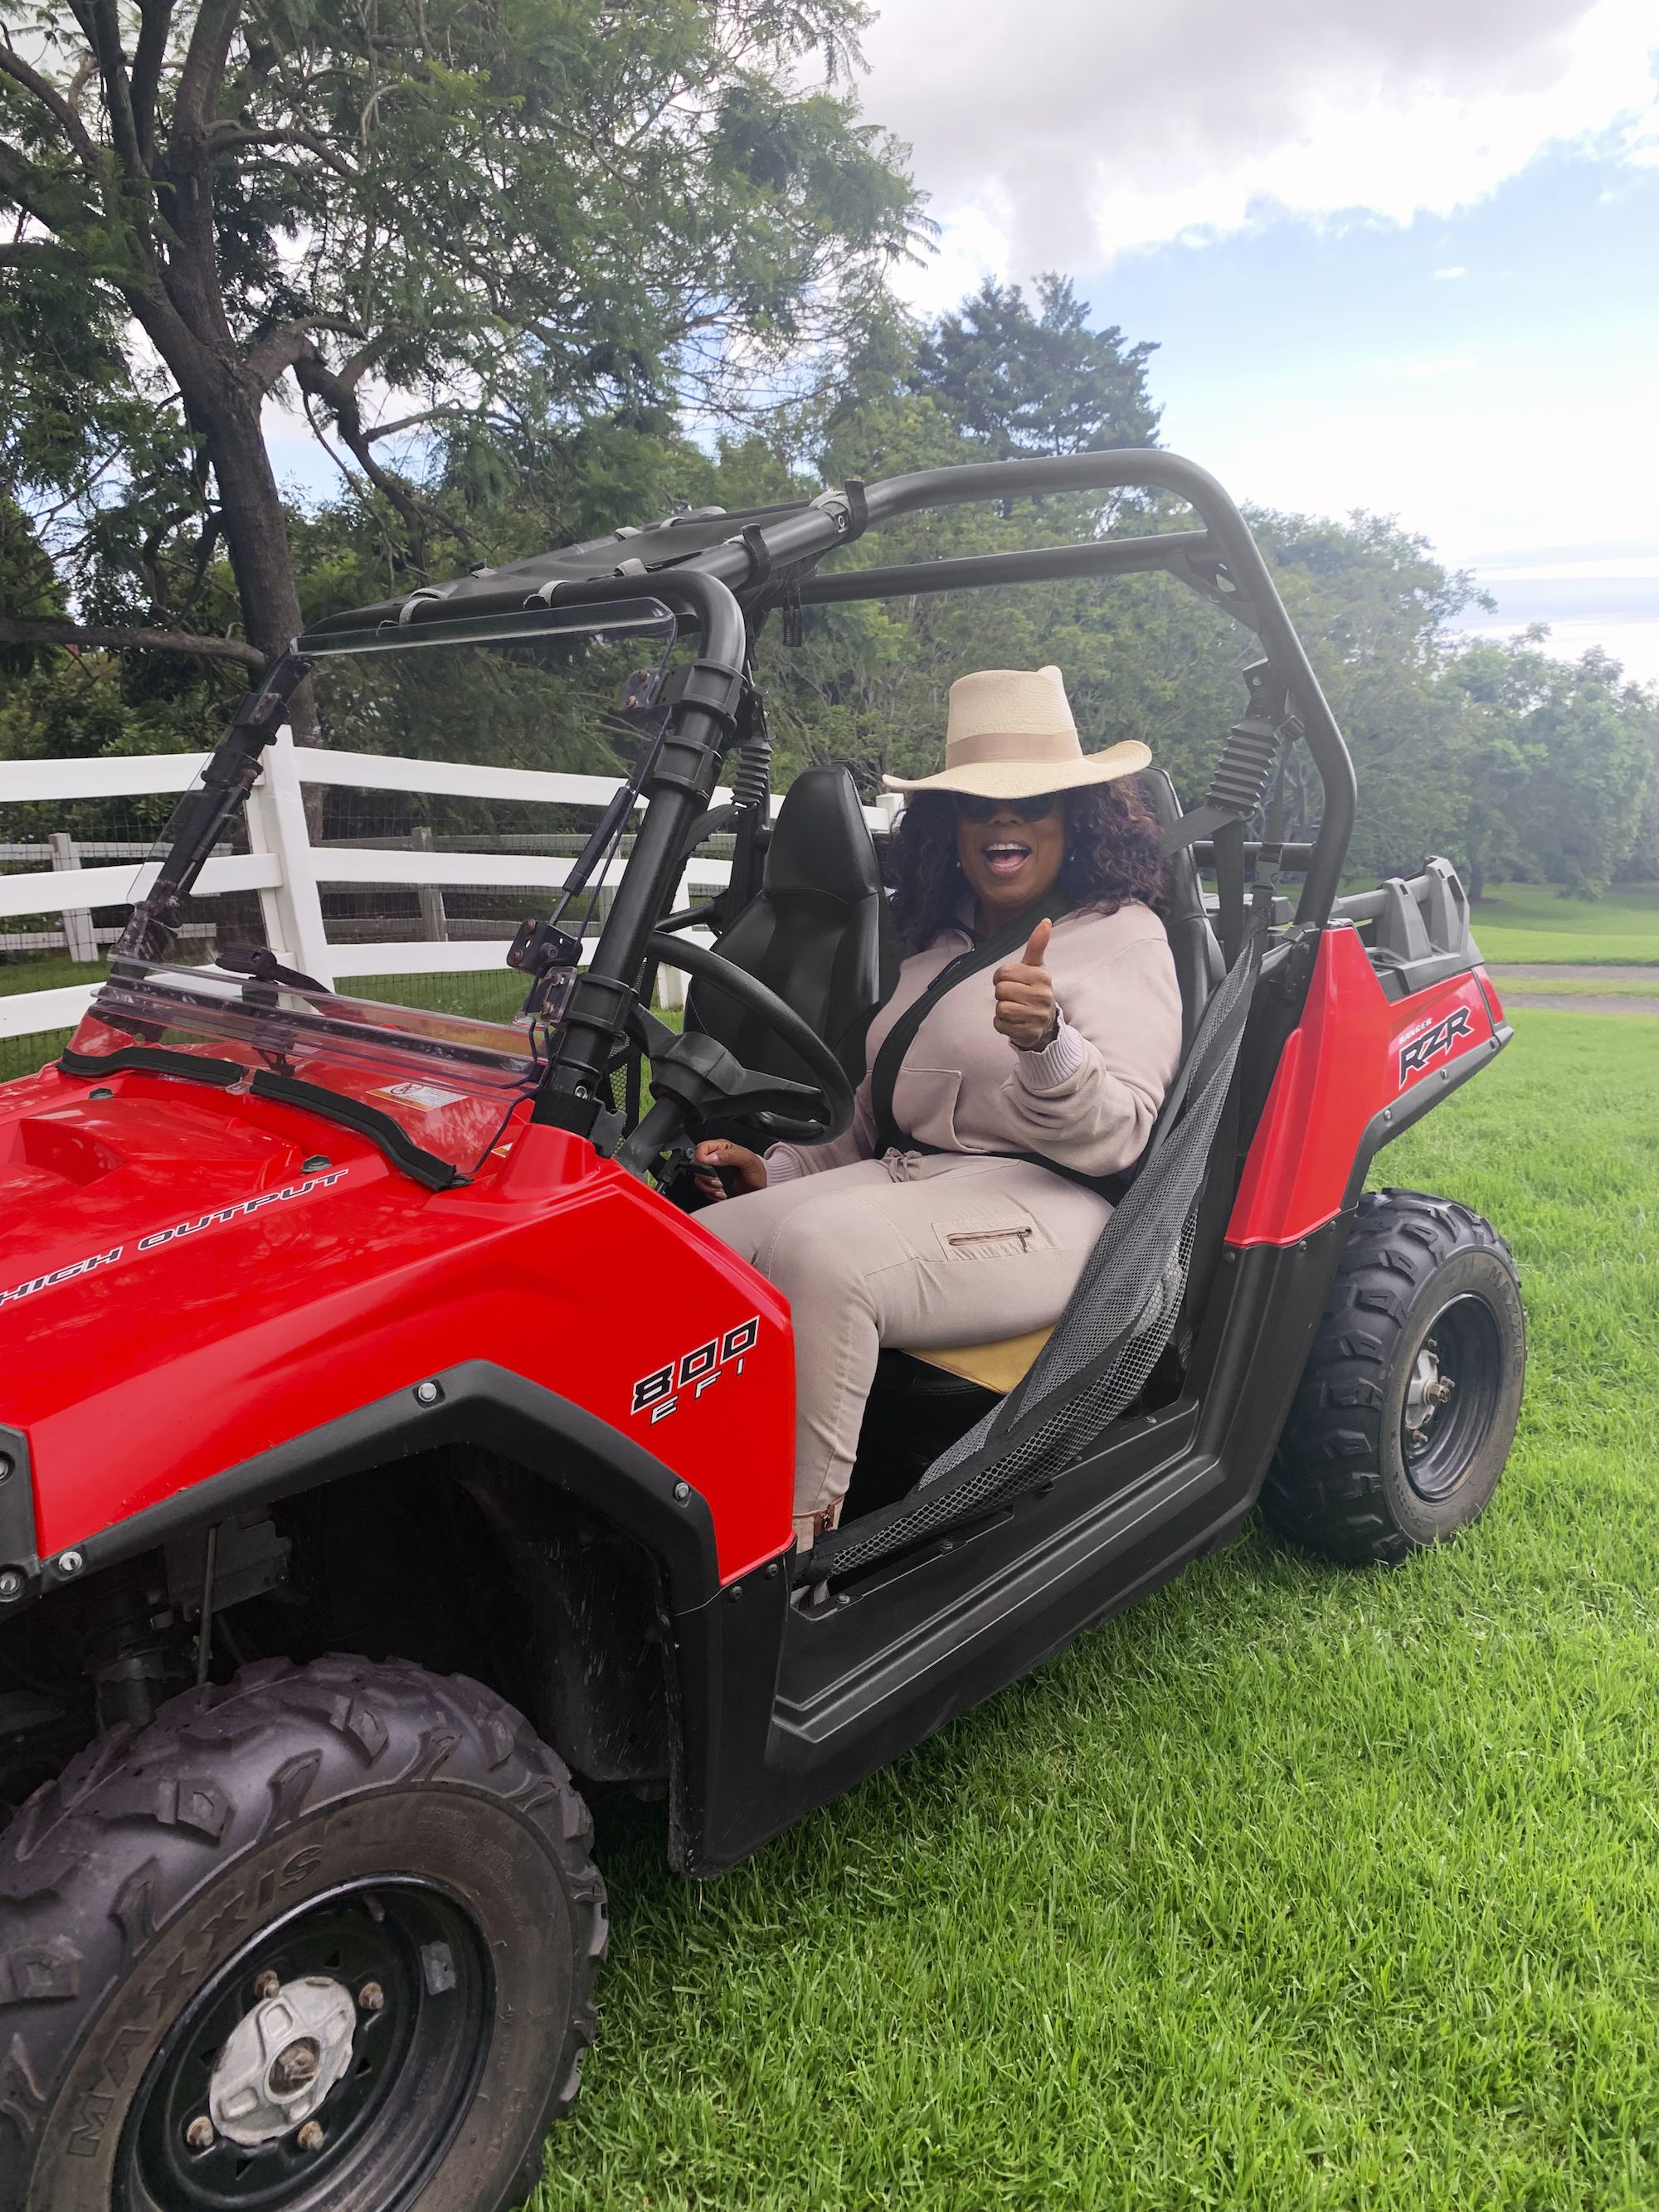 Oprah Gives Tour of Hawaii Home on an ATV Gifted by Ralph Lauren